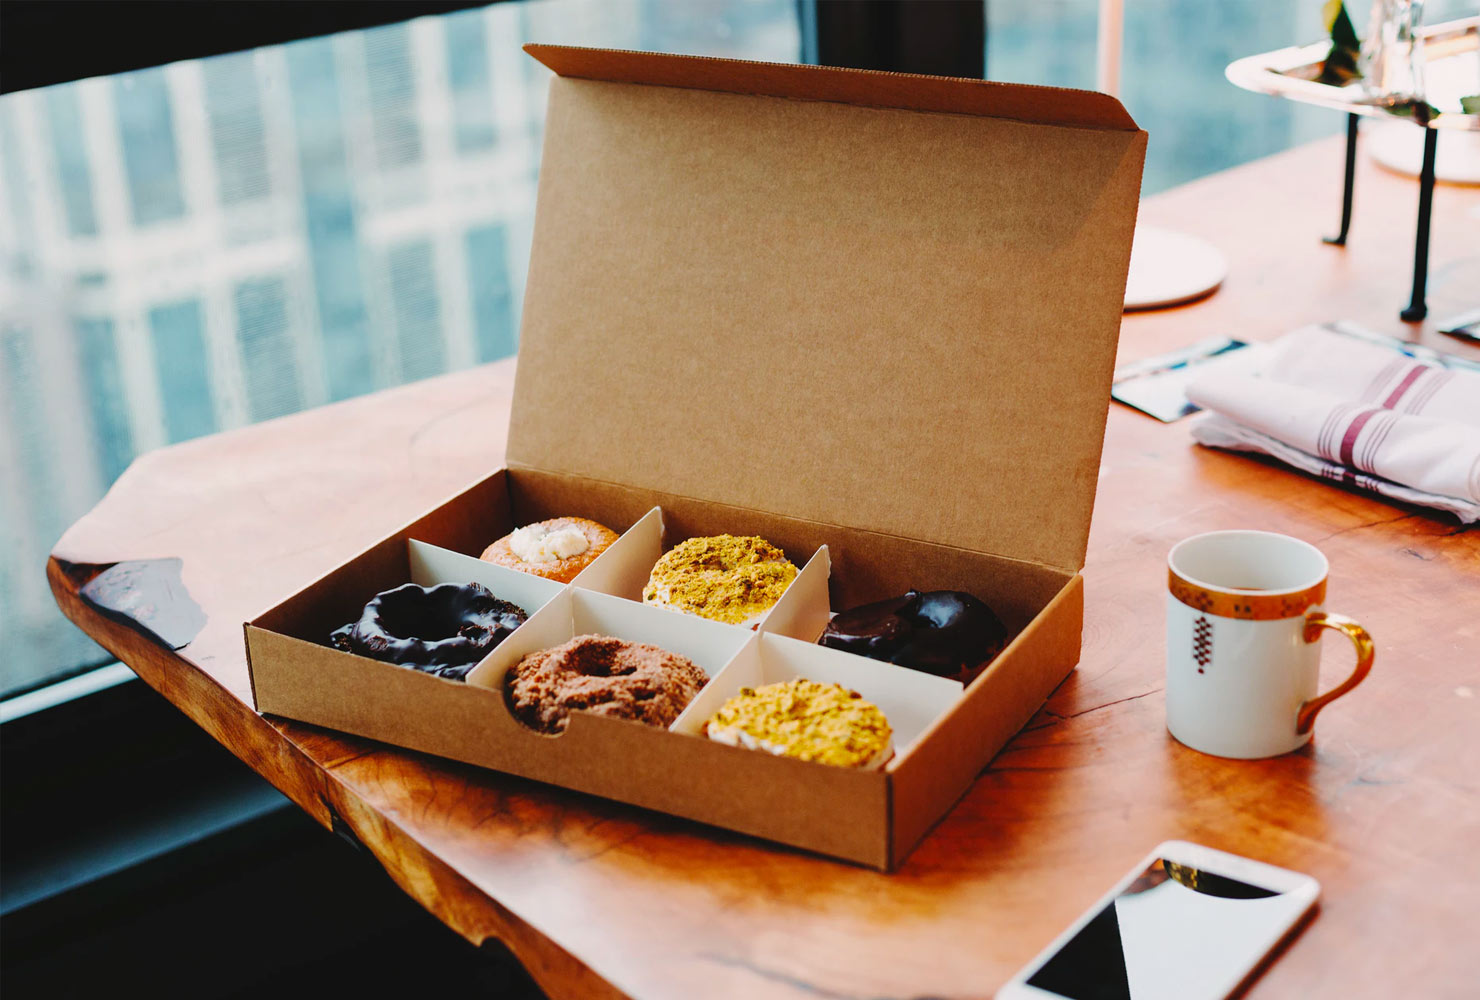 Box of donuts and coffee.